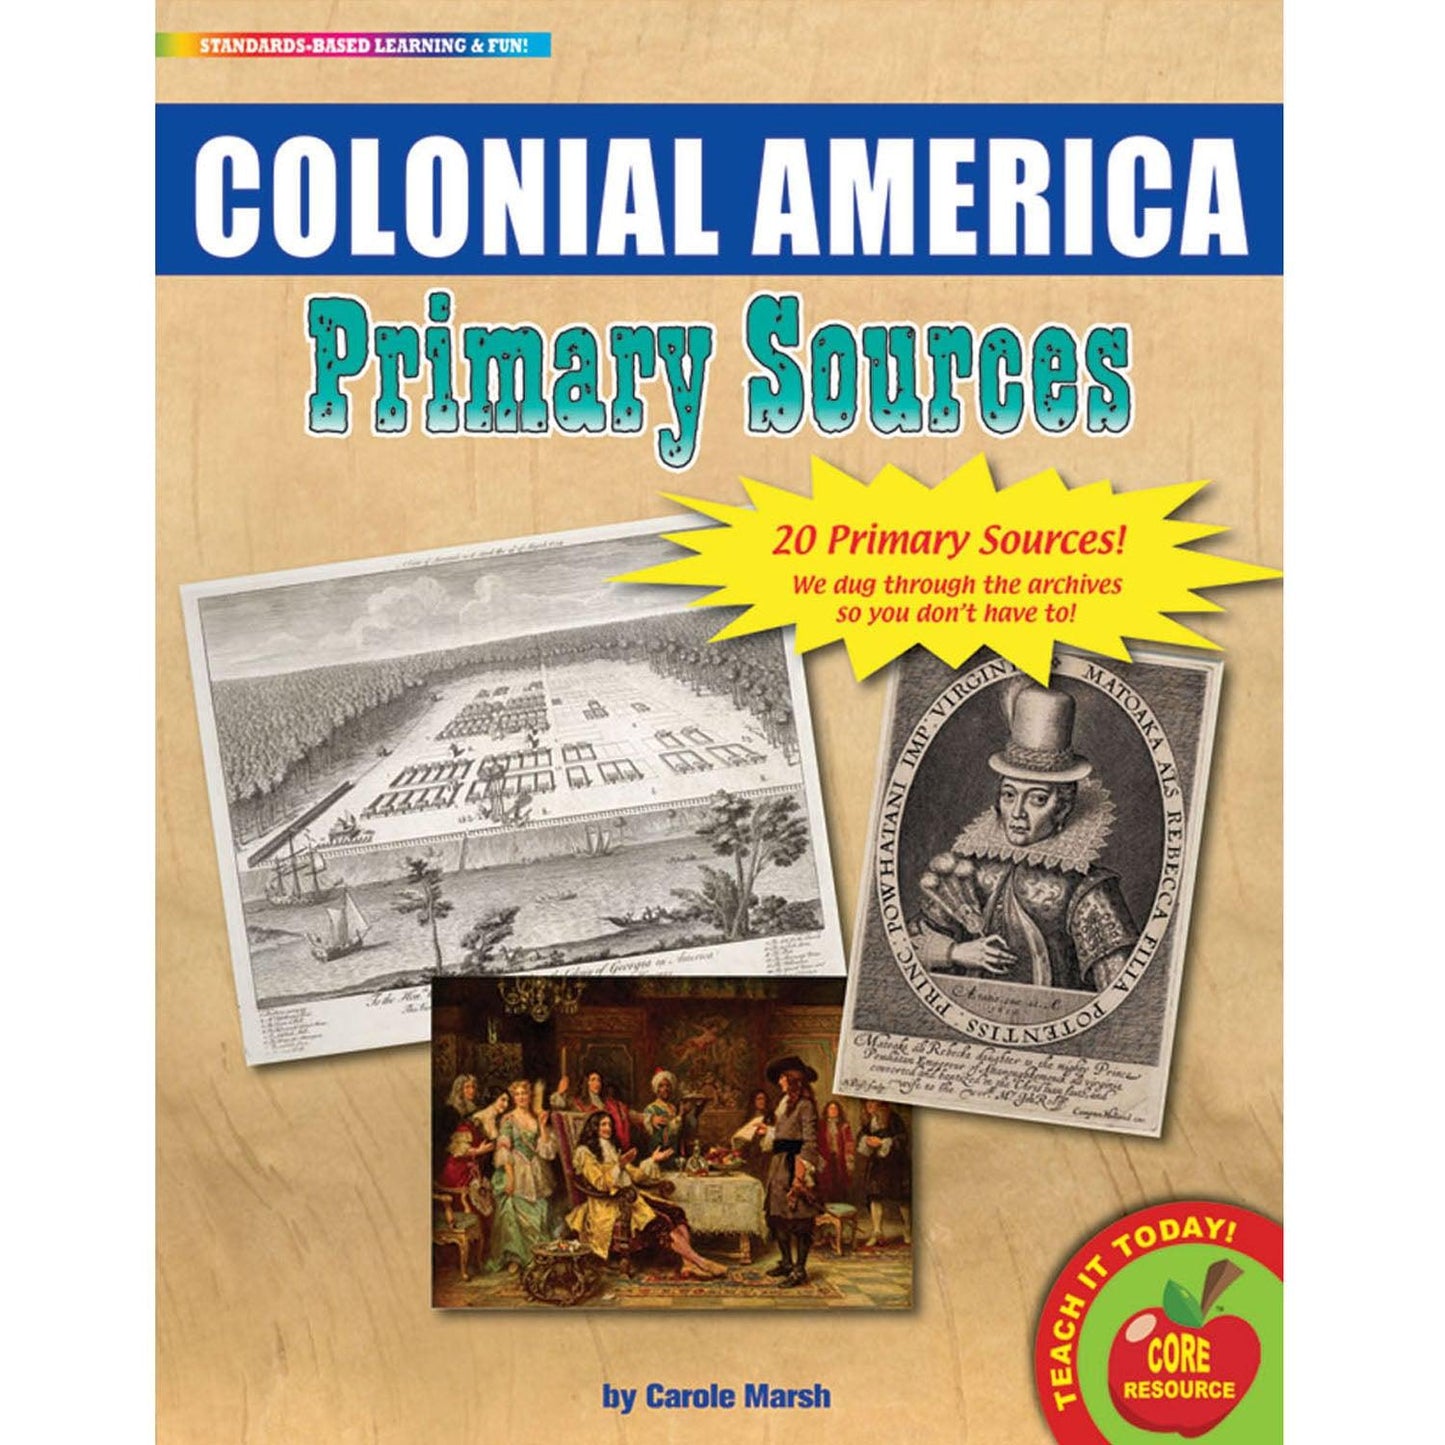 Primary Sources, Colonial America - Loomini